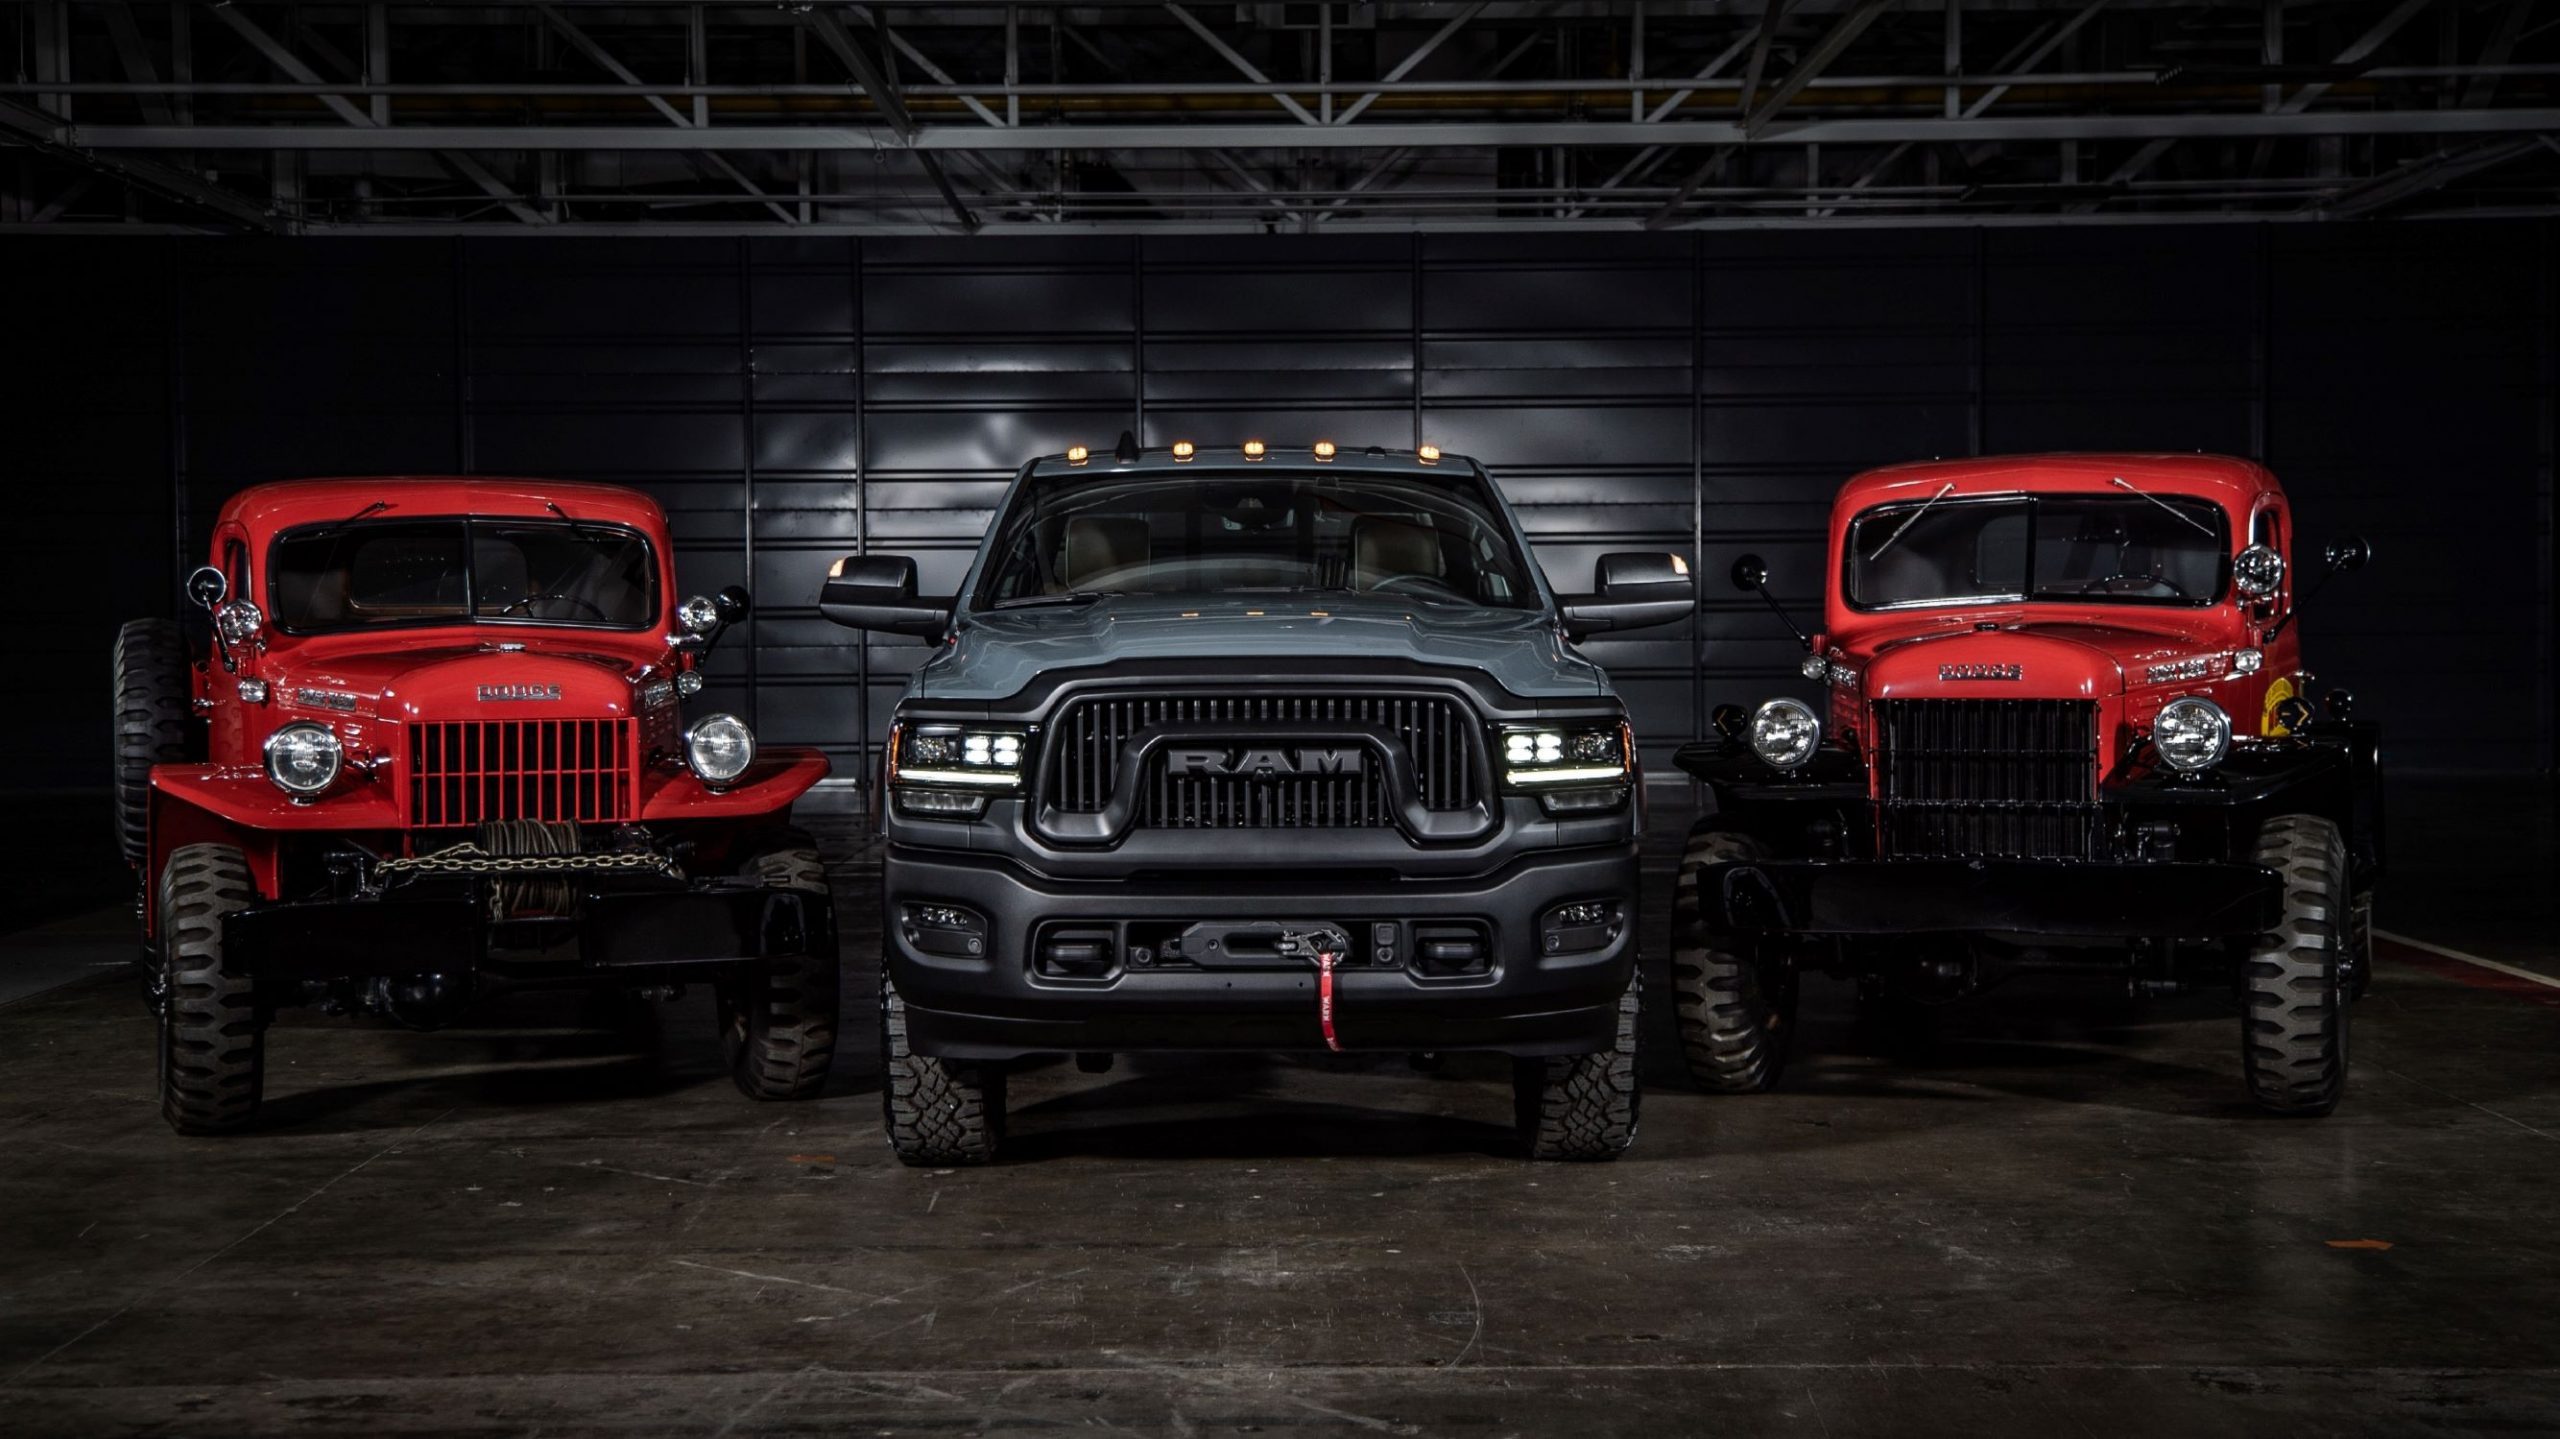 A gray 2021 Ram Power Wagon 75th Anniversary Edition flanked by a red 1946 Dodge Power Wagon and red Power Wagon Wrecker